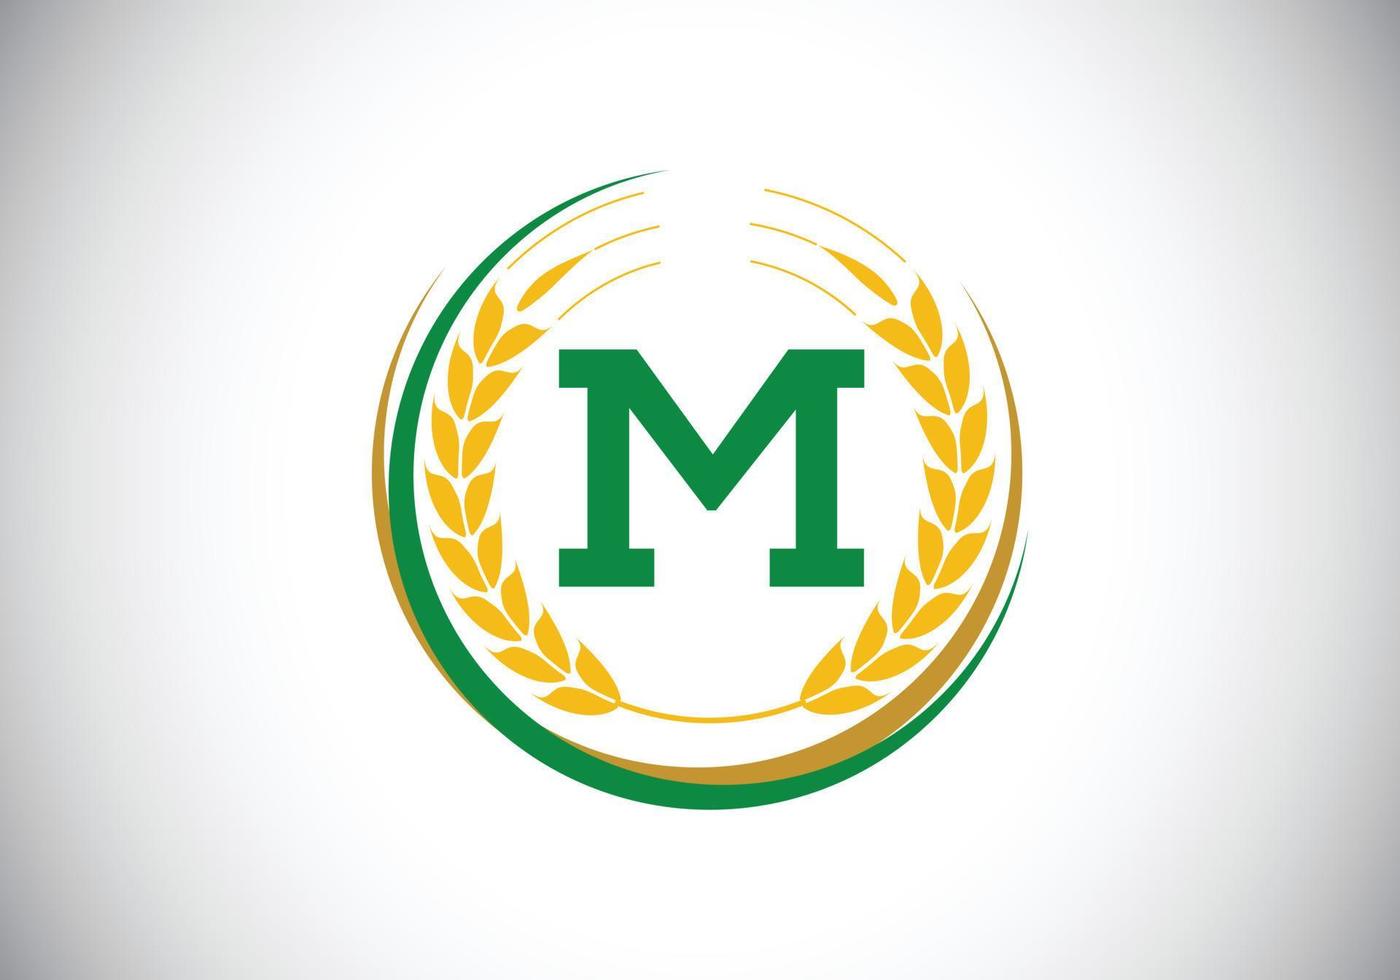 Initial letter M sign symbol with wheat ears wreath. Organic wheat farming logo design concept. Agriculture logo design vector template.